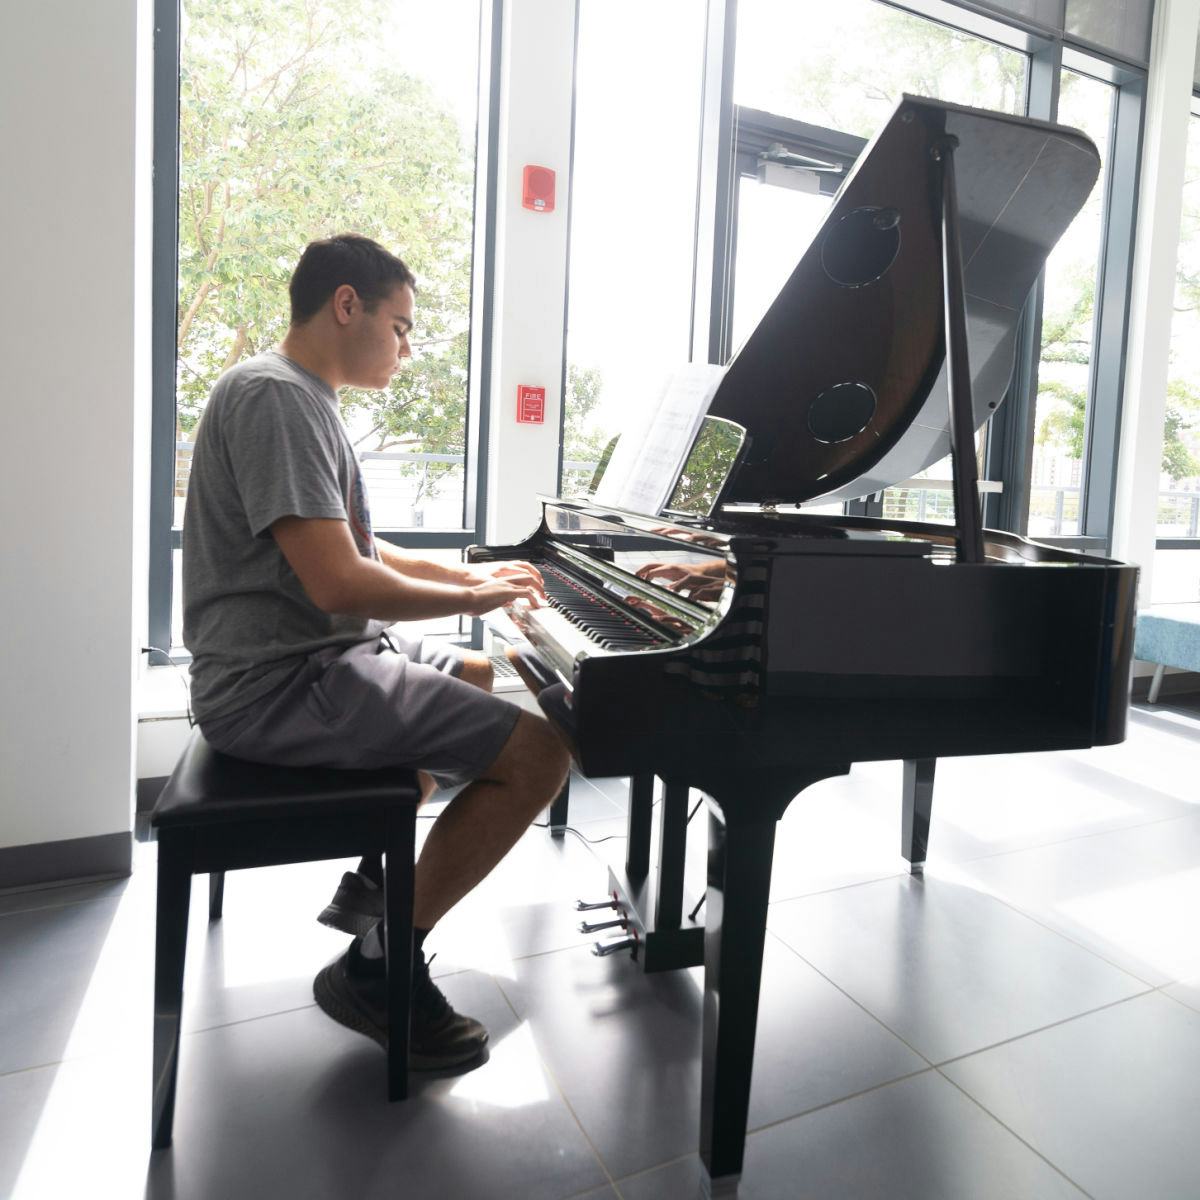 Pianist in t-shirt plays baby grand piano in UCC.